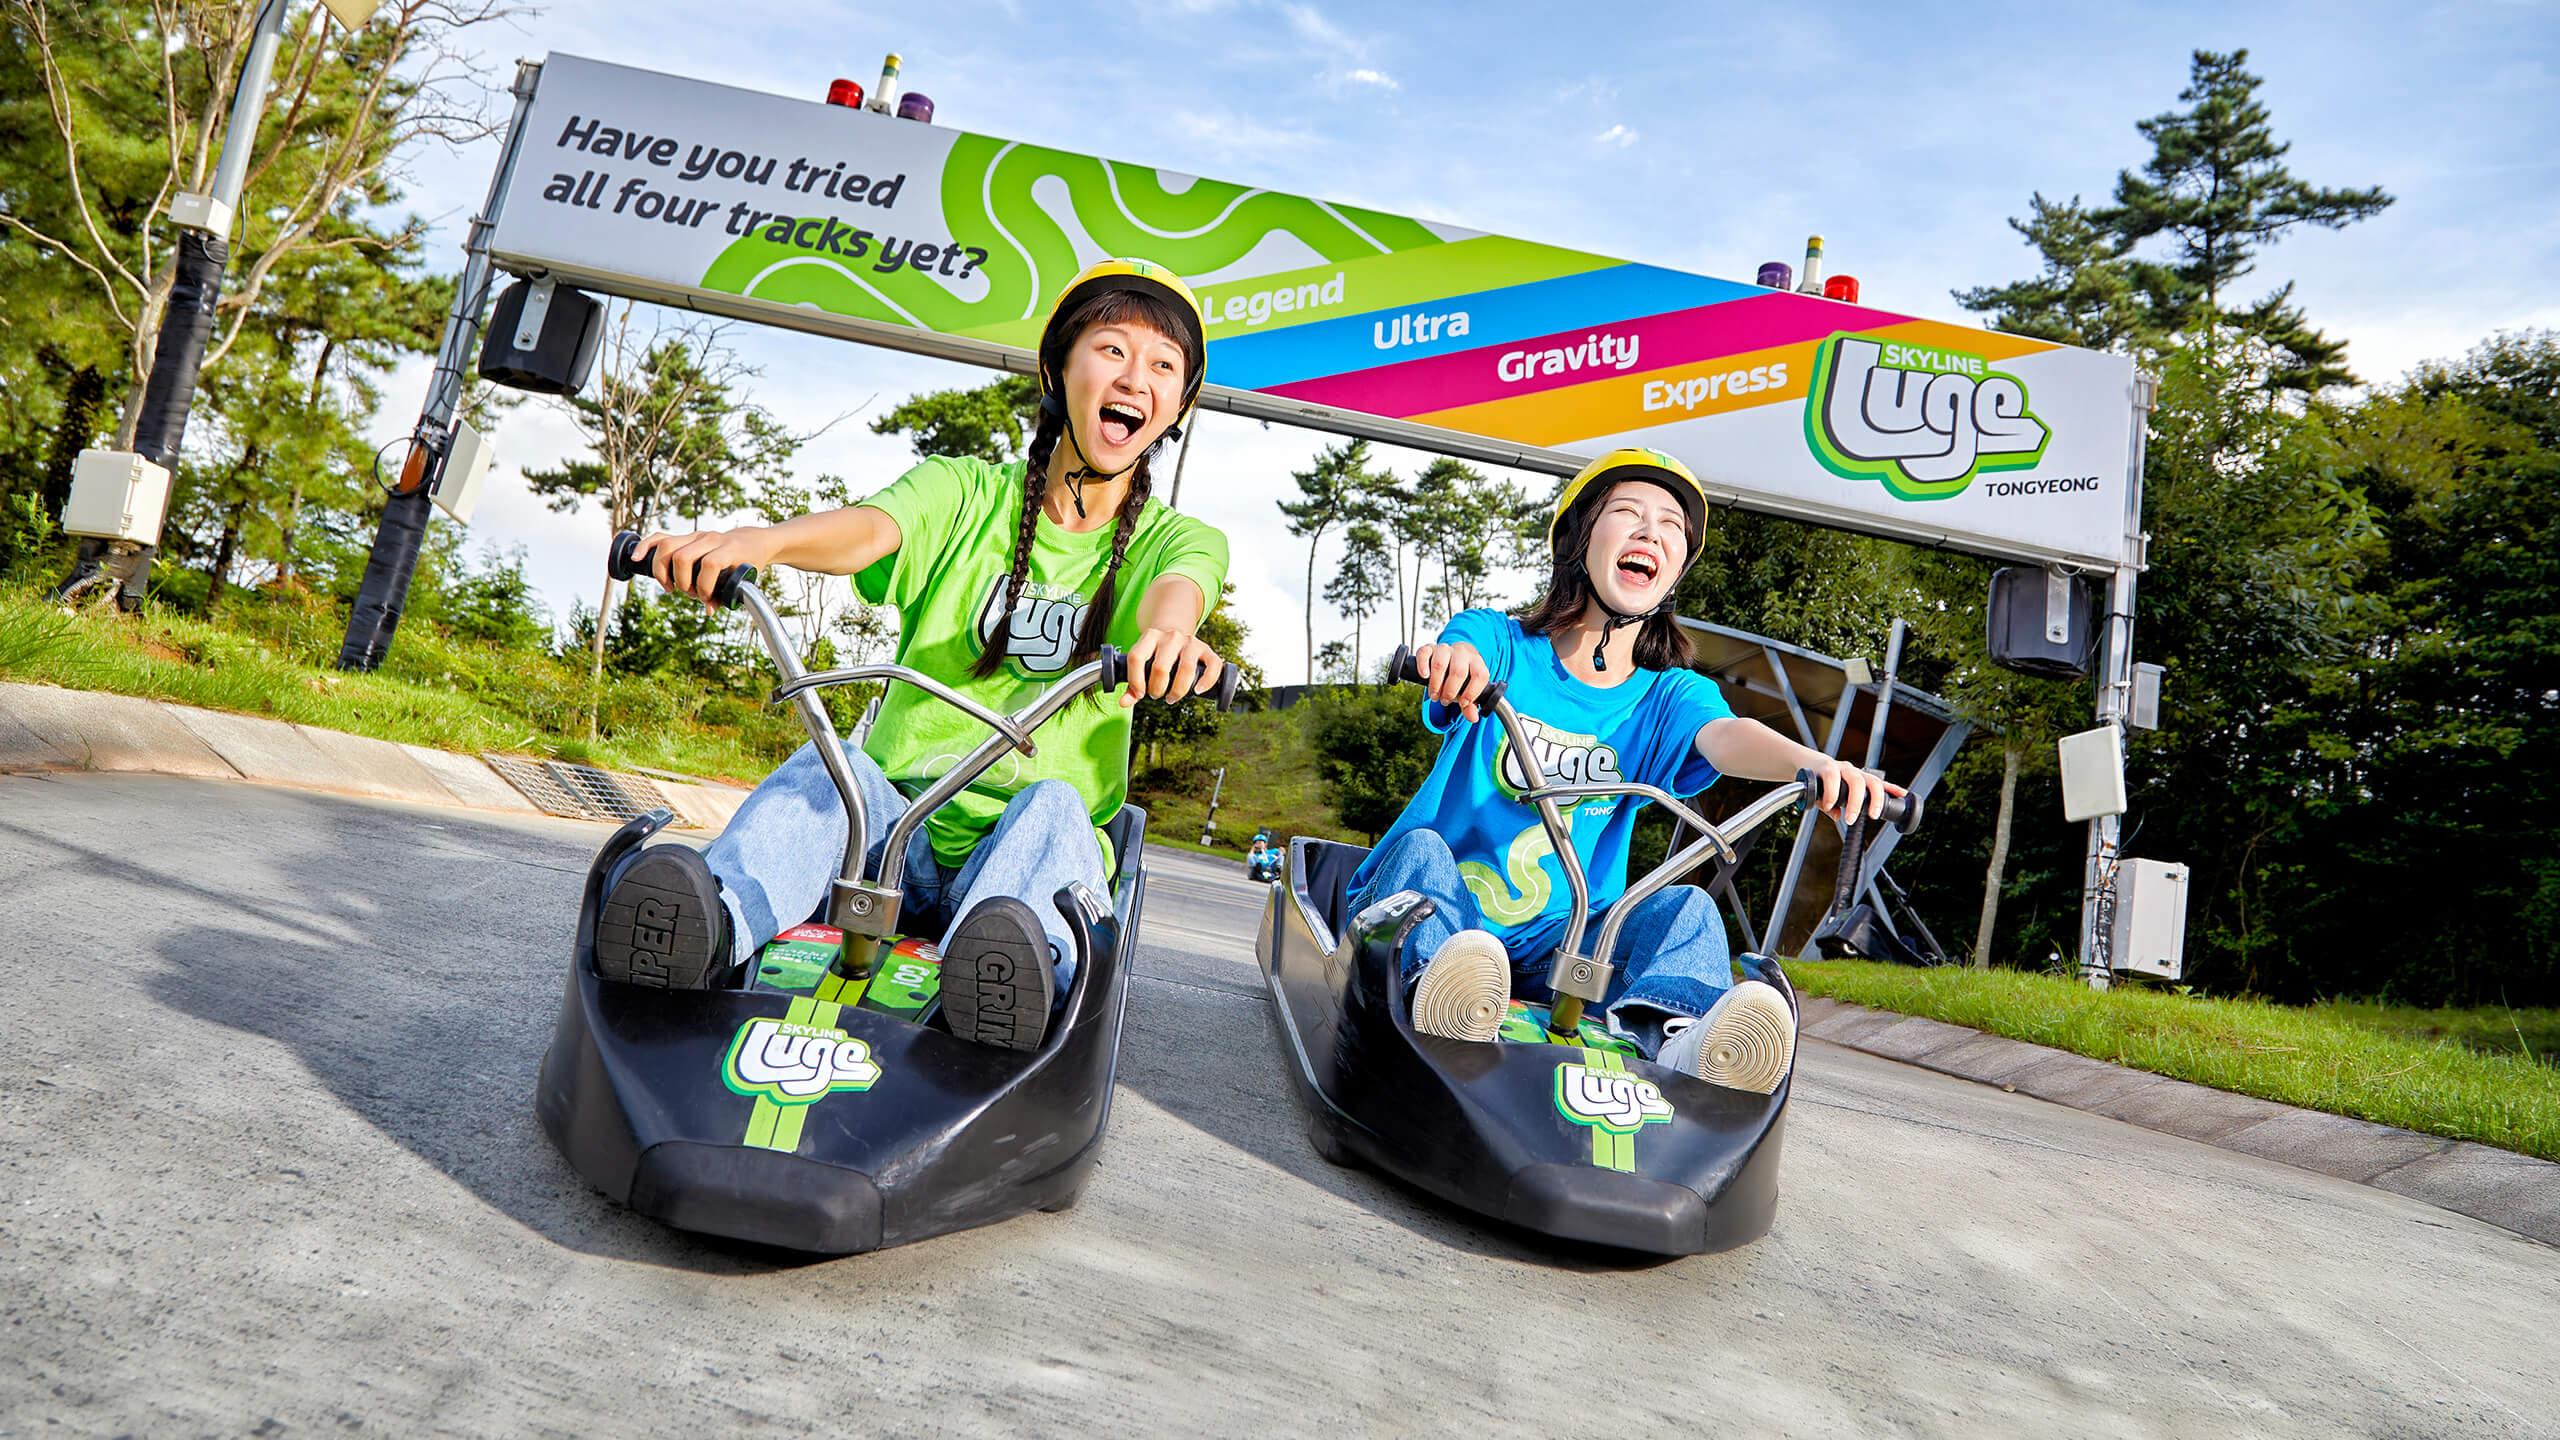 Two girls grin and scream as they ride down a steep section on the track at Skyline Luge Tongyeong.